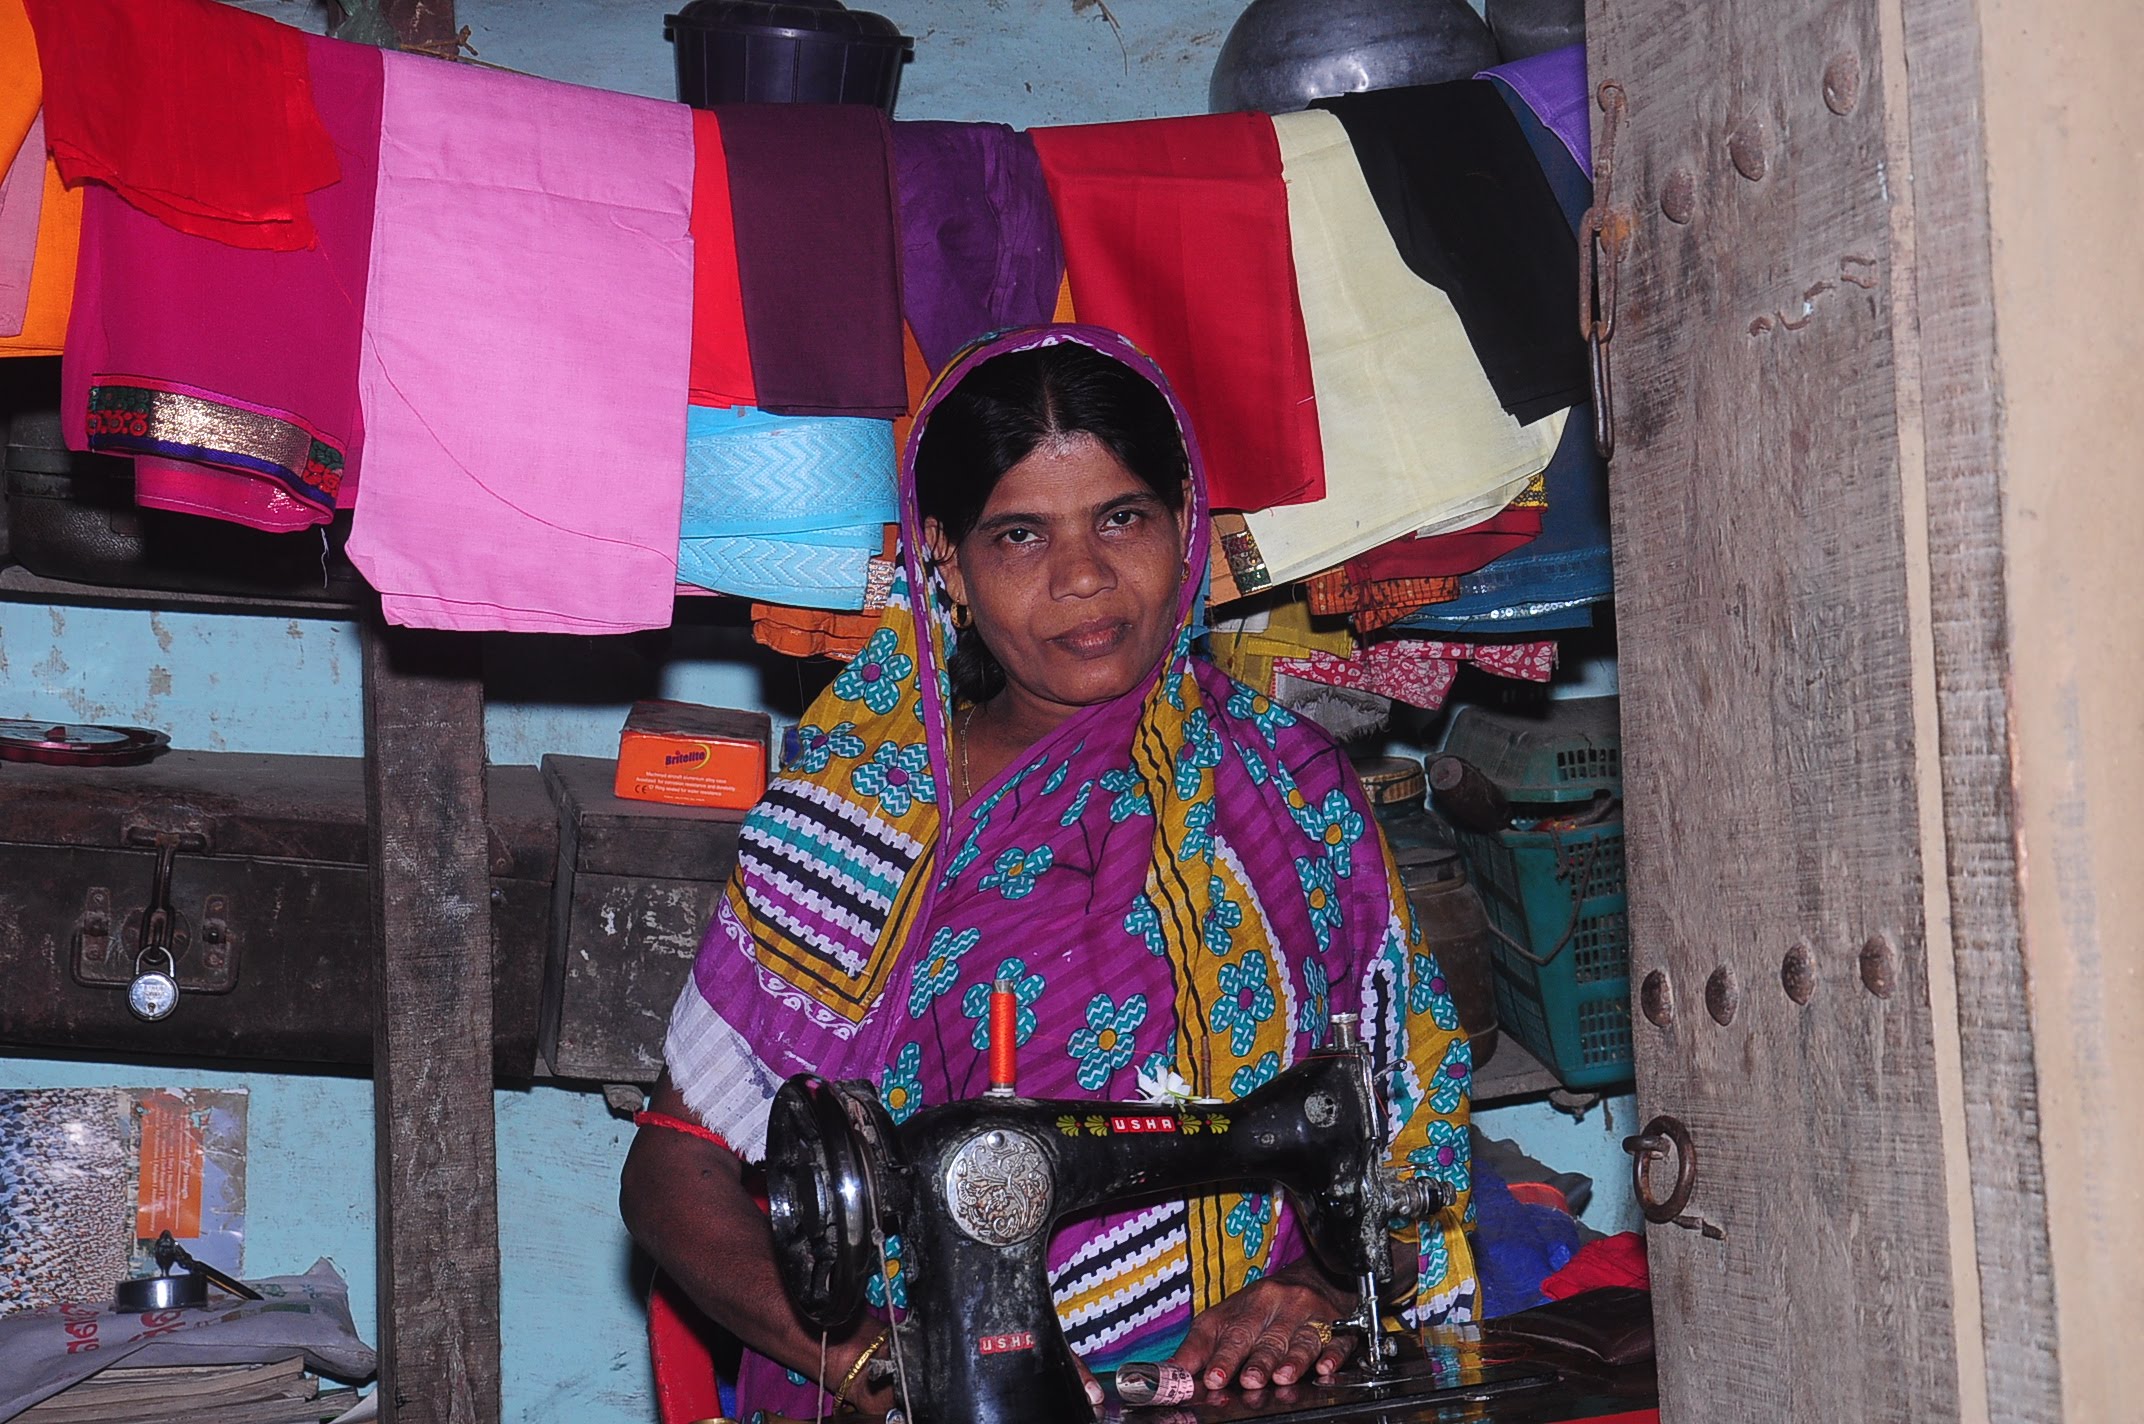 Sashirekha Nayak, was identified as one of the ultra-poor women in her village by the community members. Widowed and with no children, she stays alone in a one-roomed thatched house and has received a tailoring machine as an asset. “I do tailoring in this one room house of mine. I want to teach more girls how to operate the machine, but space is a constraint. My eyes are failing, but at least I can make a living for myself now.”